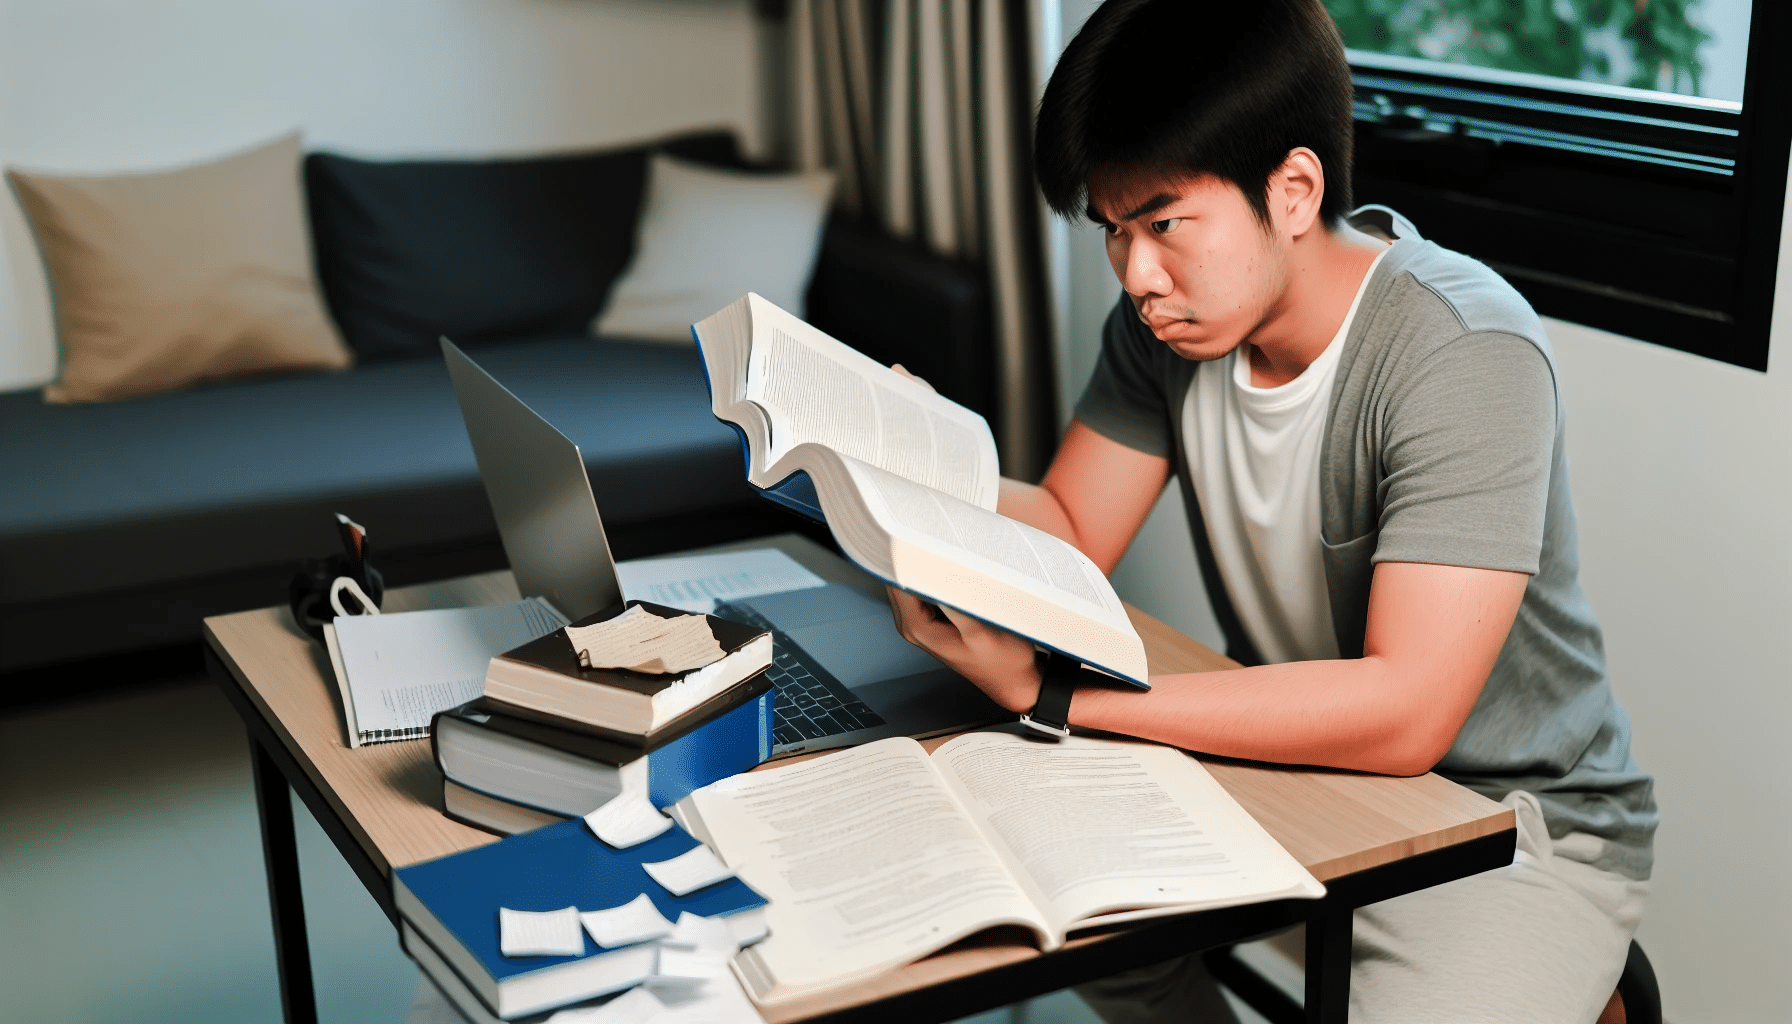 Photo of a college student studying with books and notes, showing signs of focus and concentration